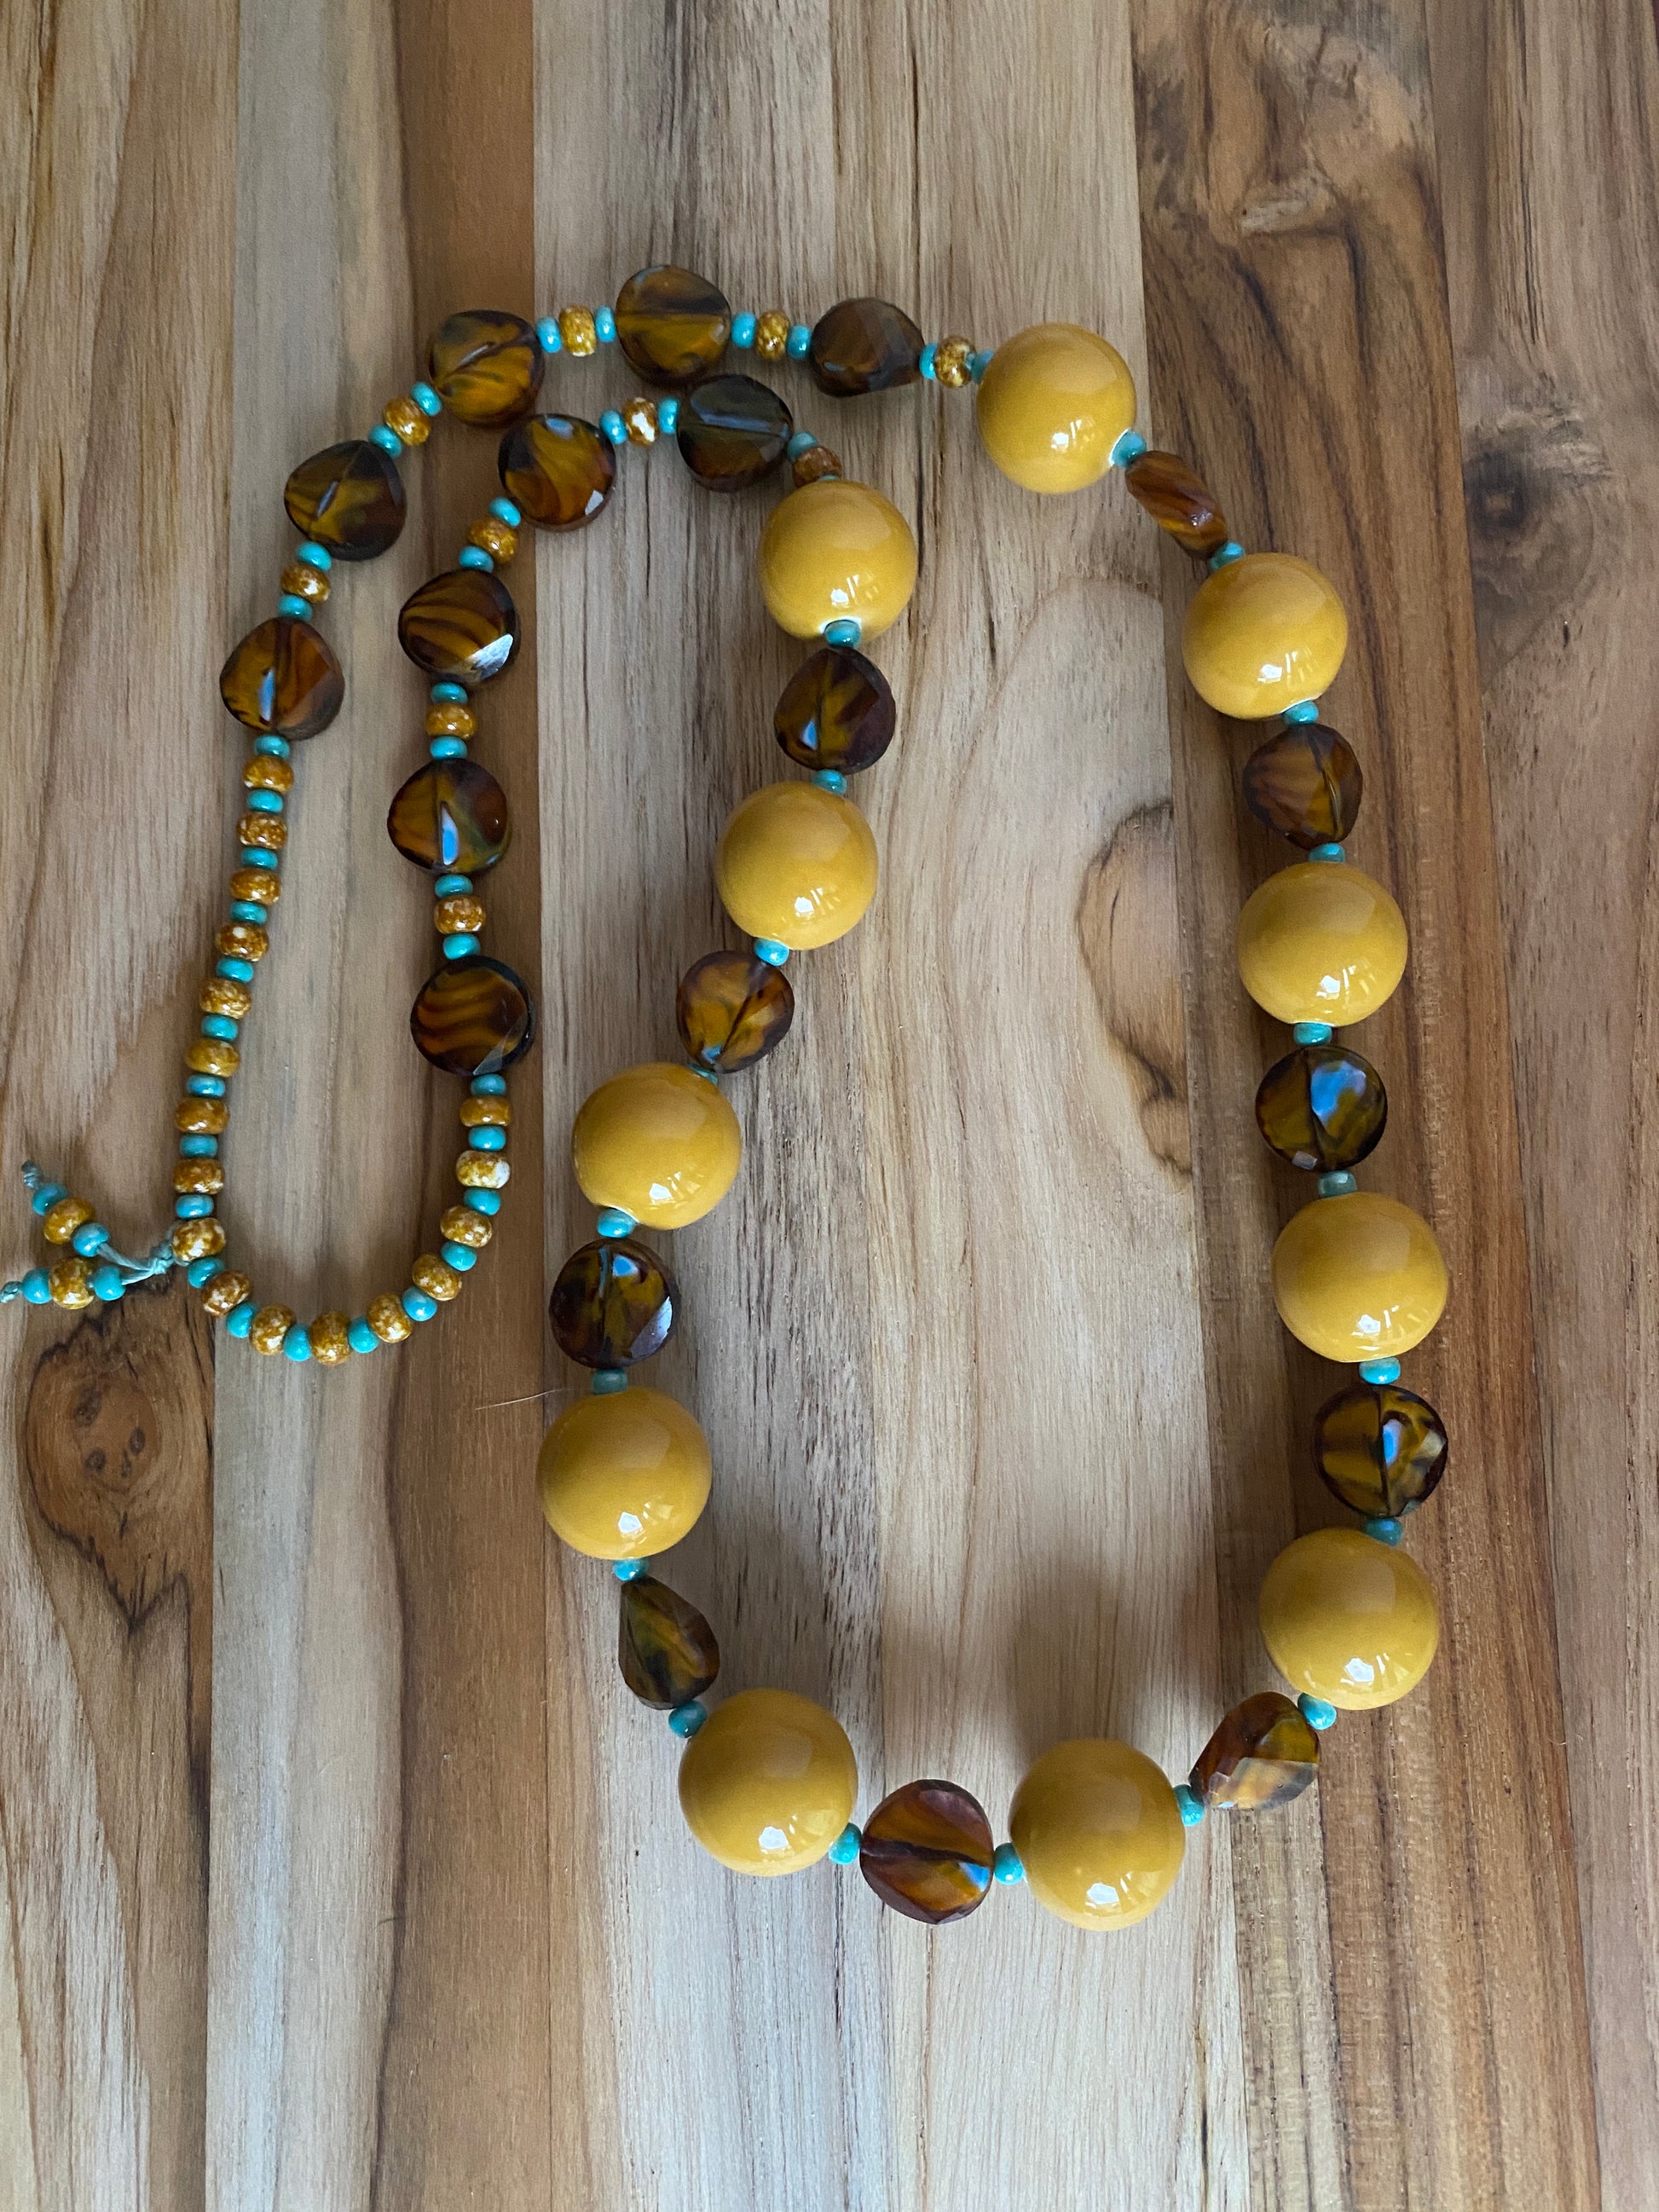 28" Mustard Yellow Ceramic Beaded Necklace with Brown and Turquoise Glass and Seed Beads - My Urban Gems